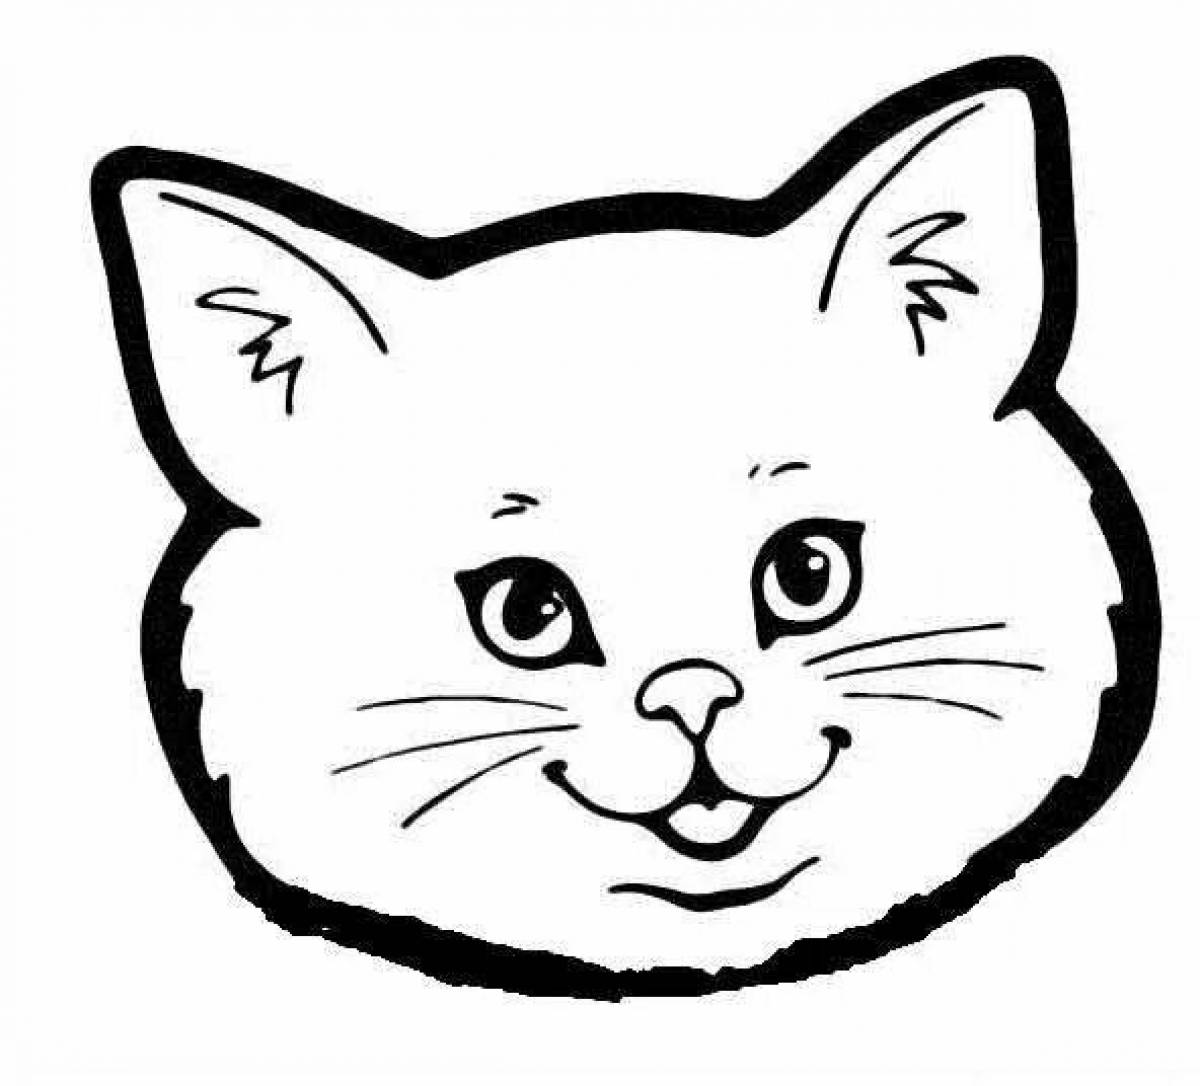 Naughty cat face coloring page